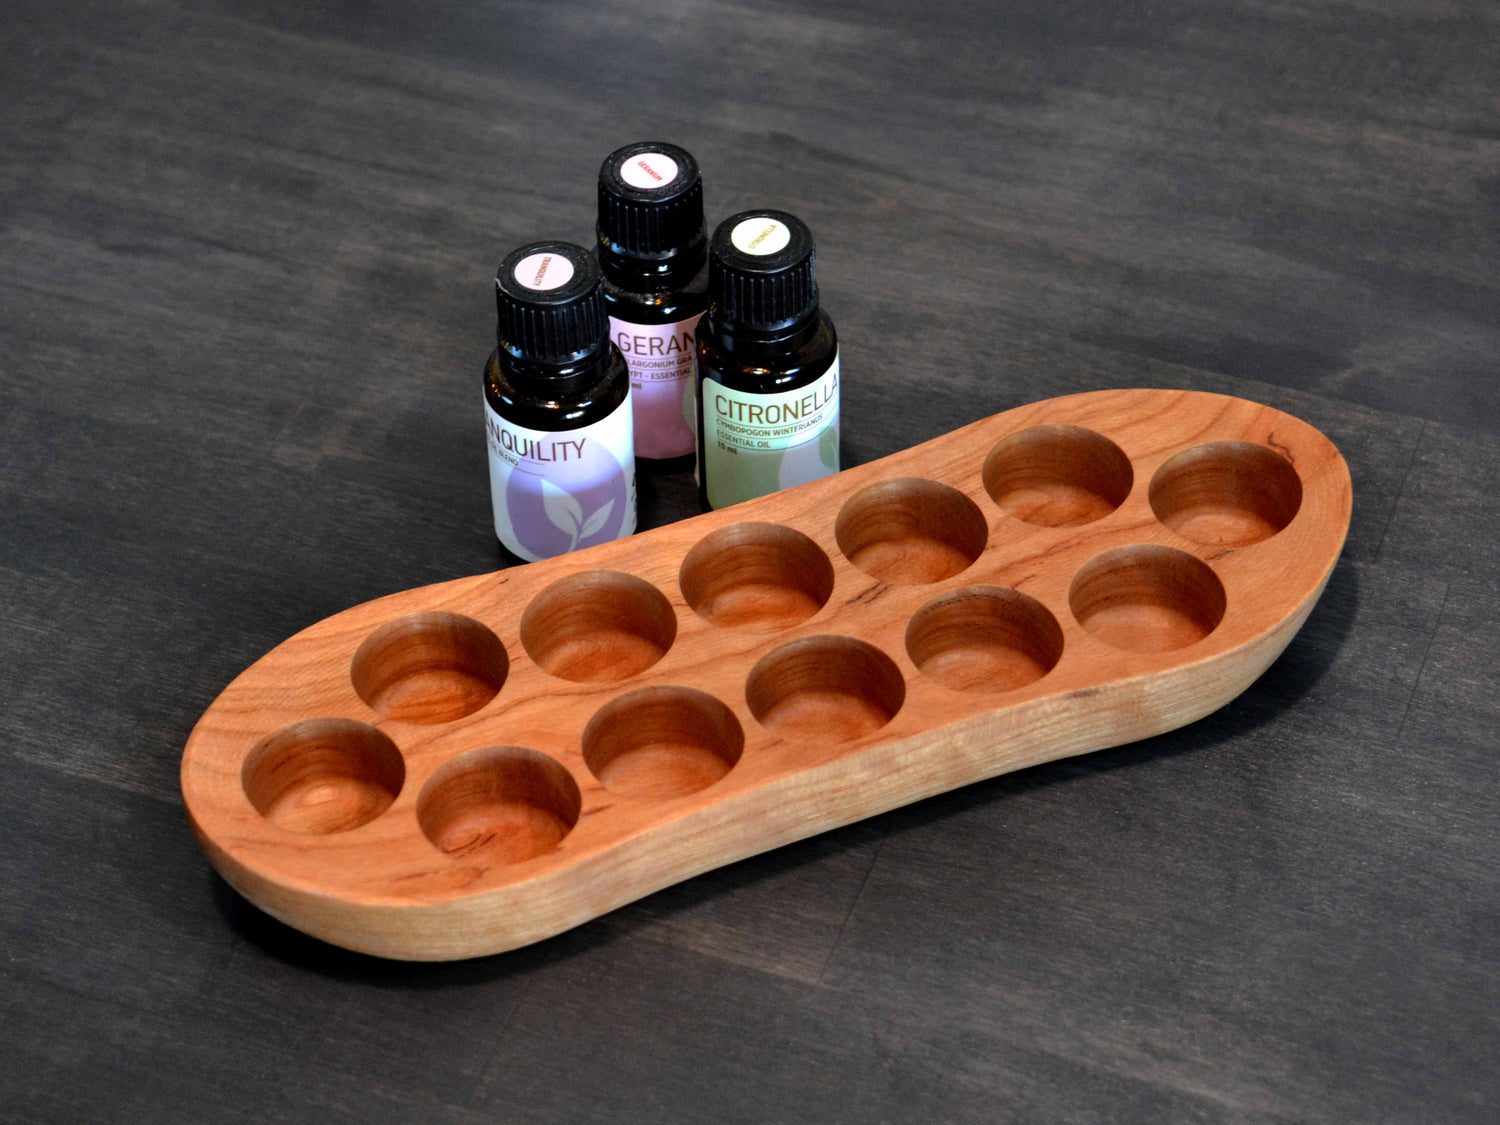 RMO oils with wooden boat display holder